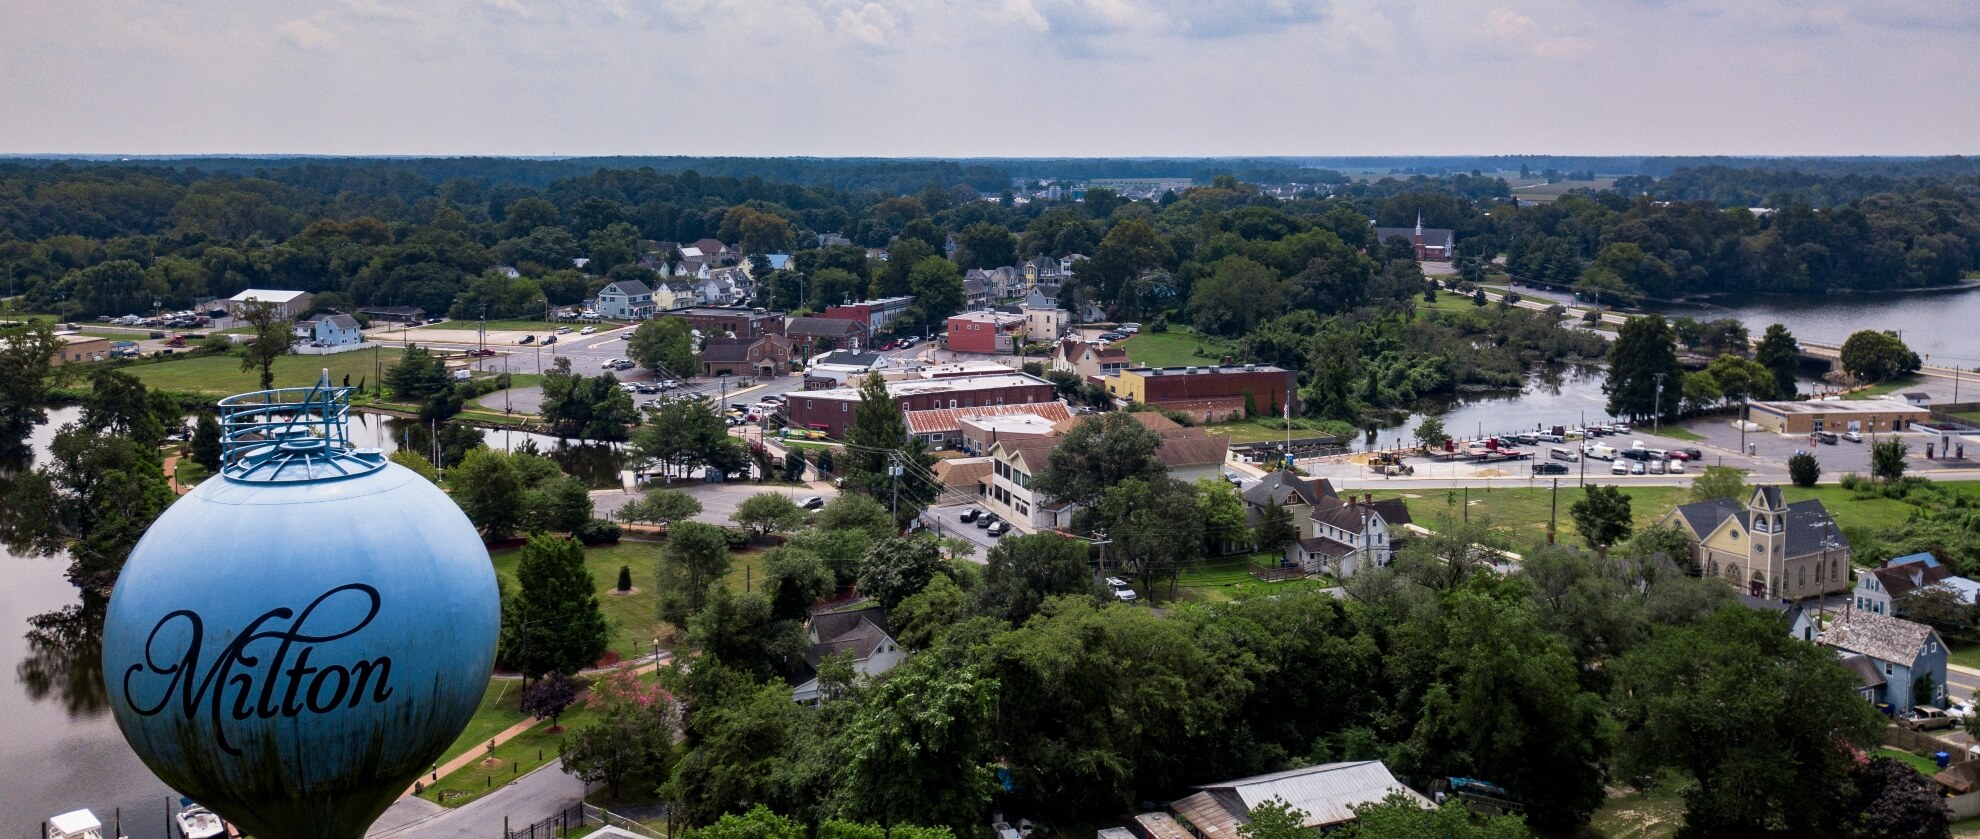 Home - Town of Milton - Sussex County Delaware